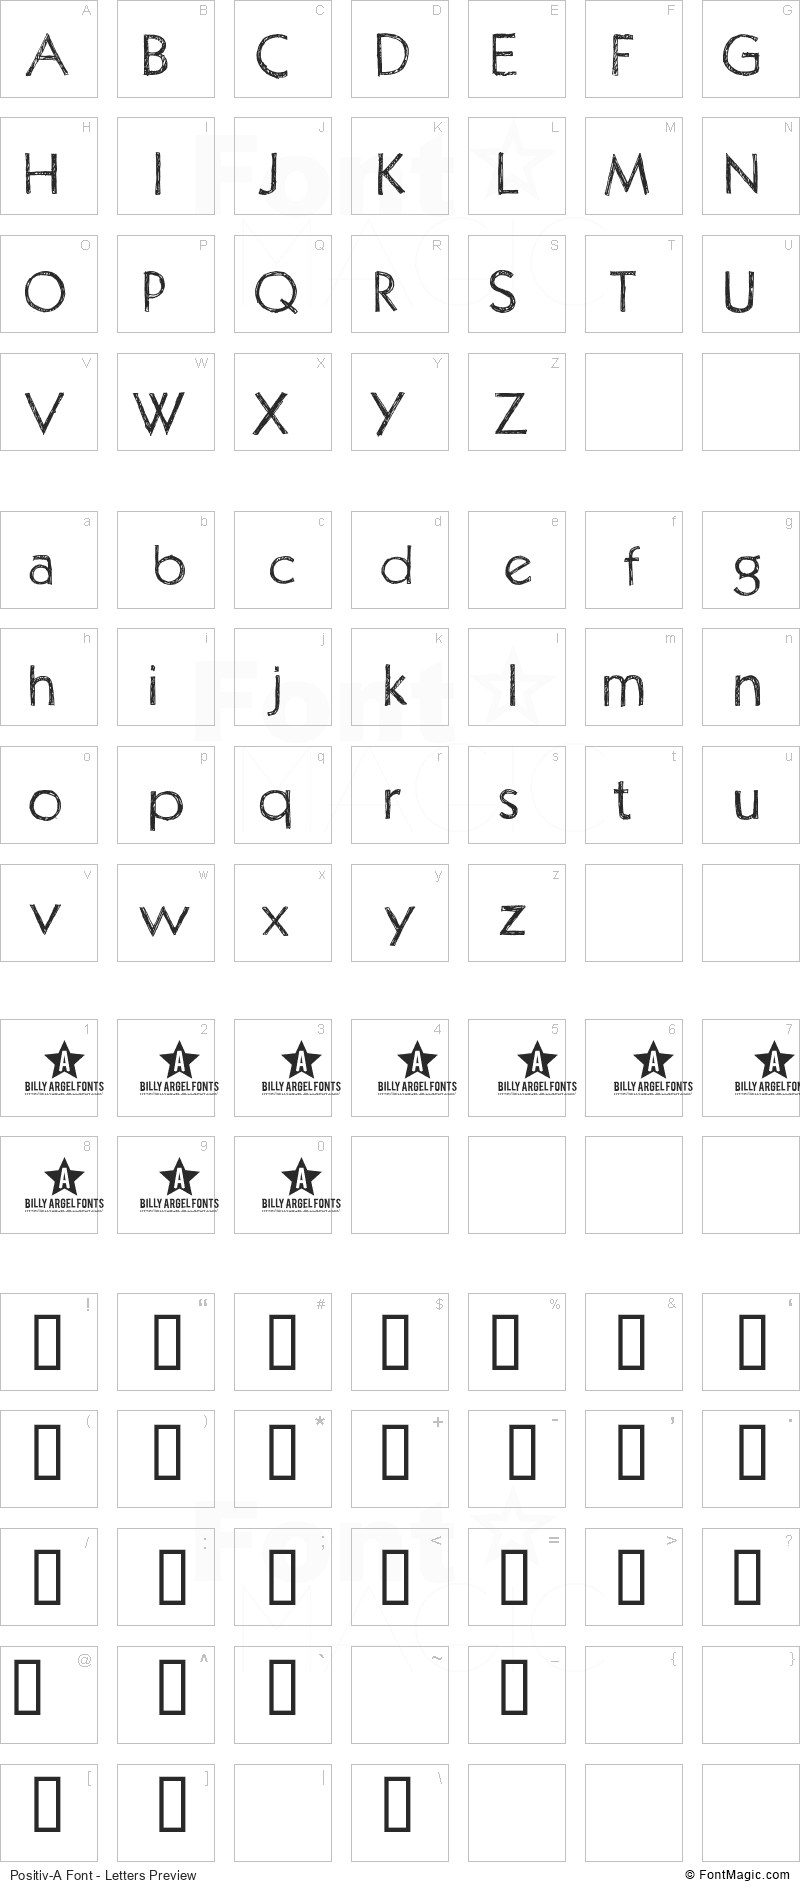 Positiv-A Font - All Latters Preview Chart